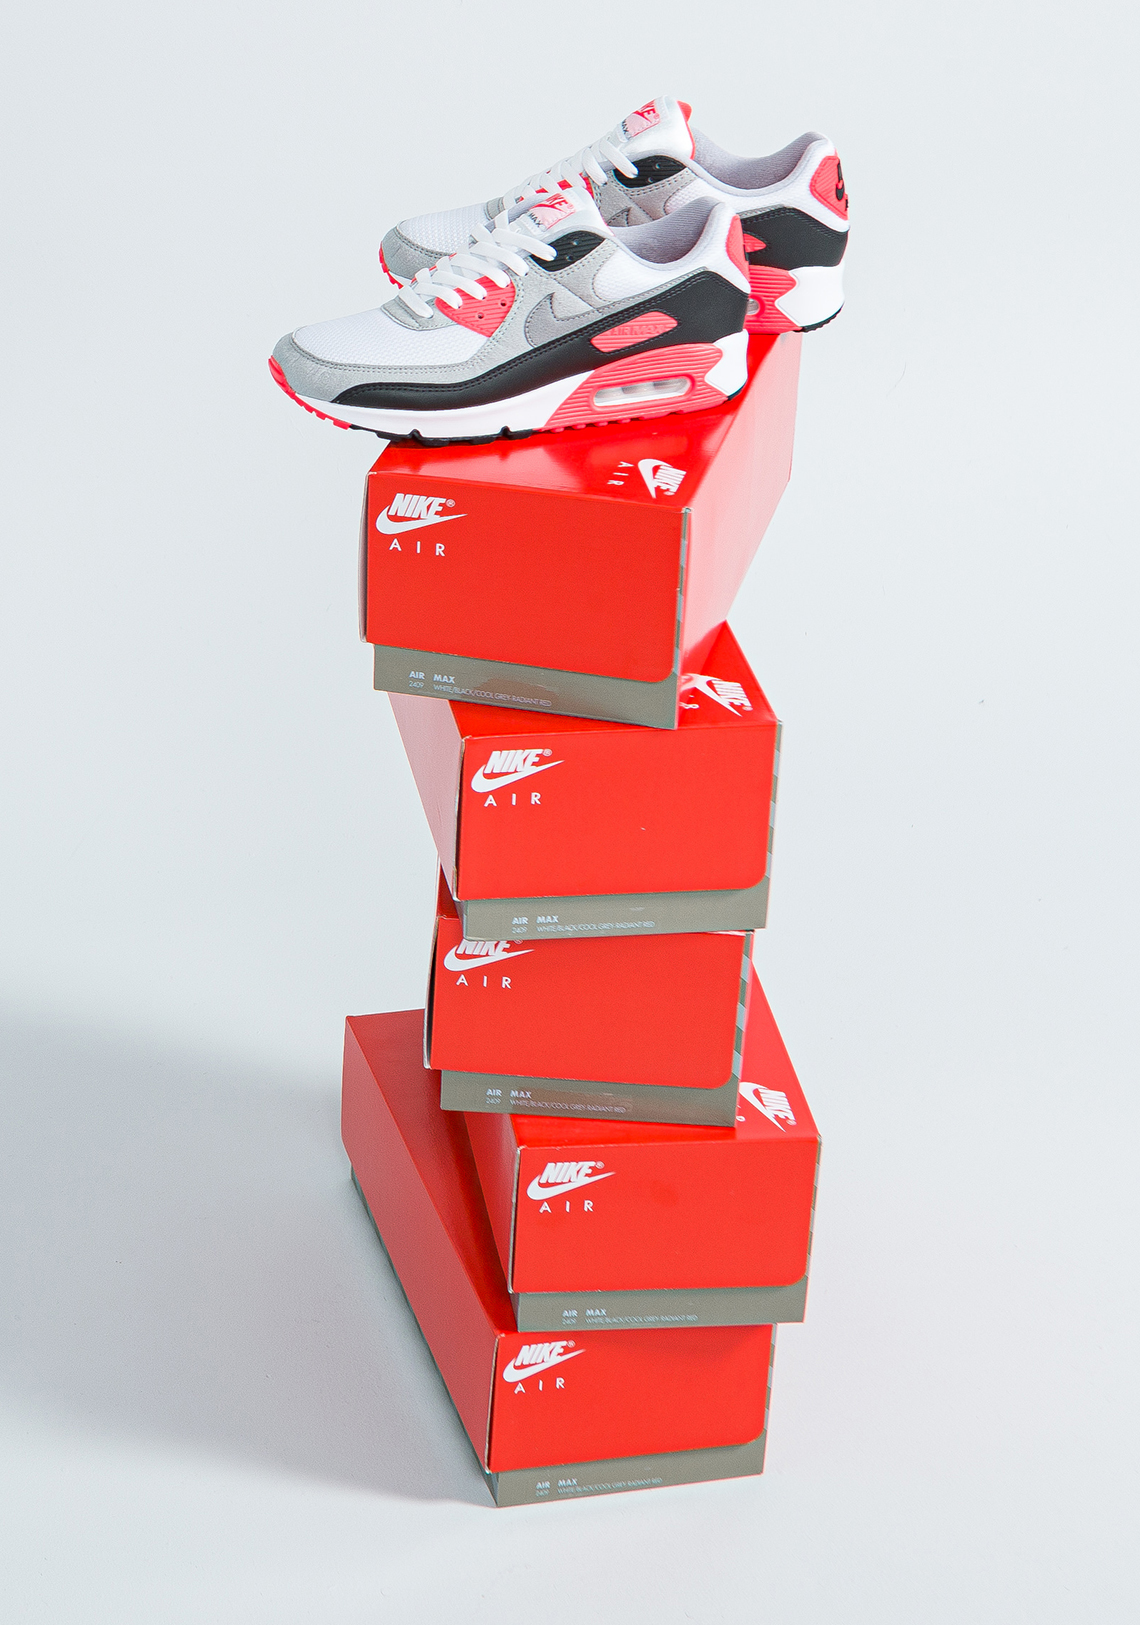 Nike Air Max 90 Infrared 2020 Release Reminder 2